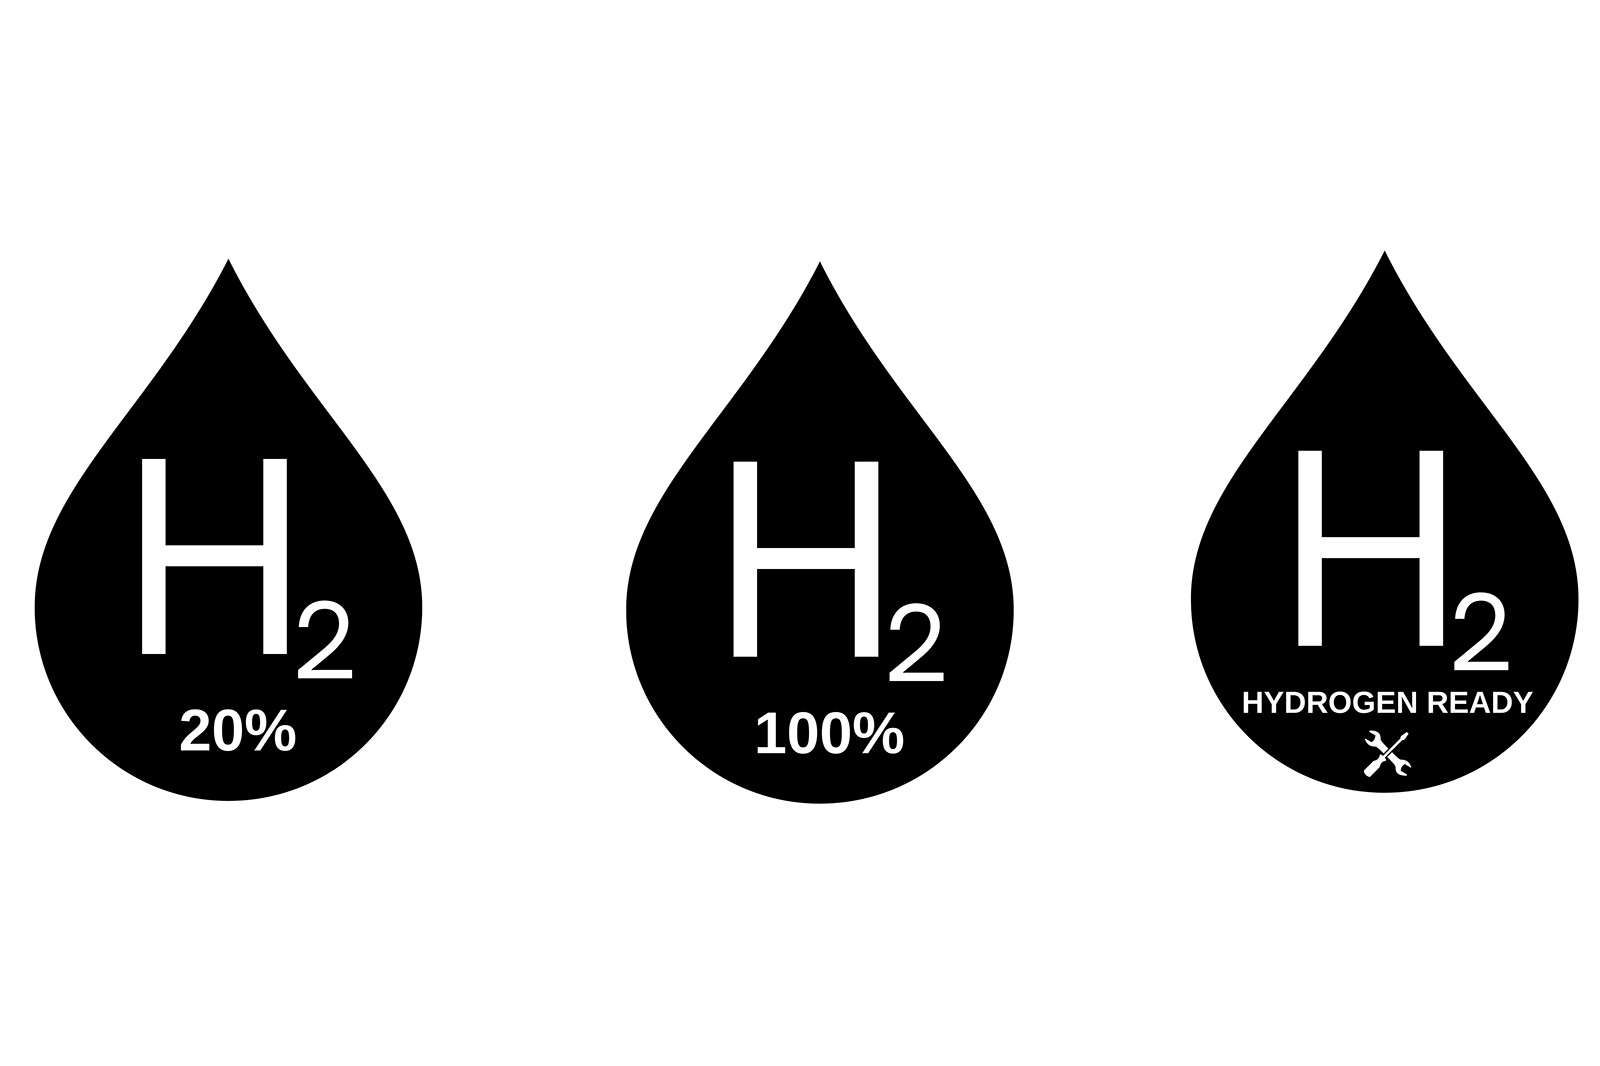 Manufacturers agree hydrogen appliance labels